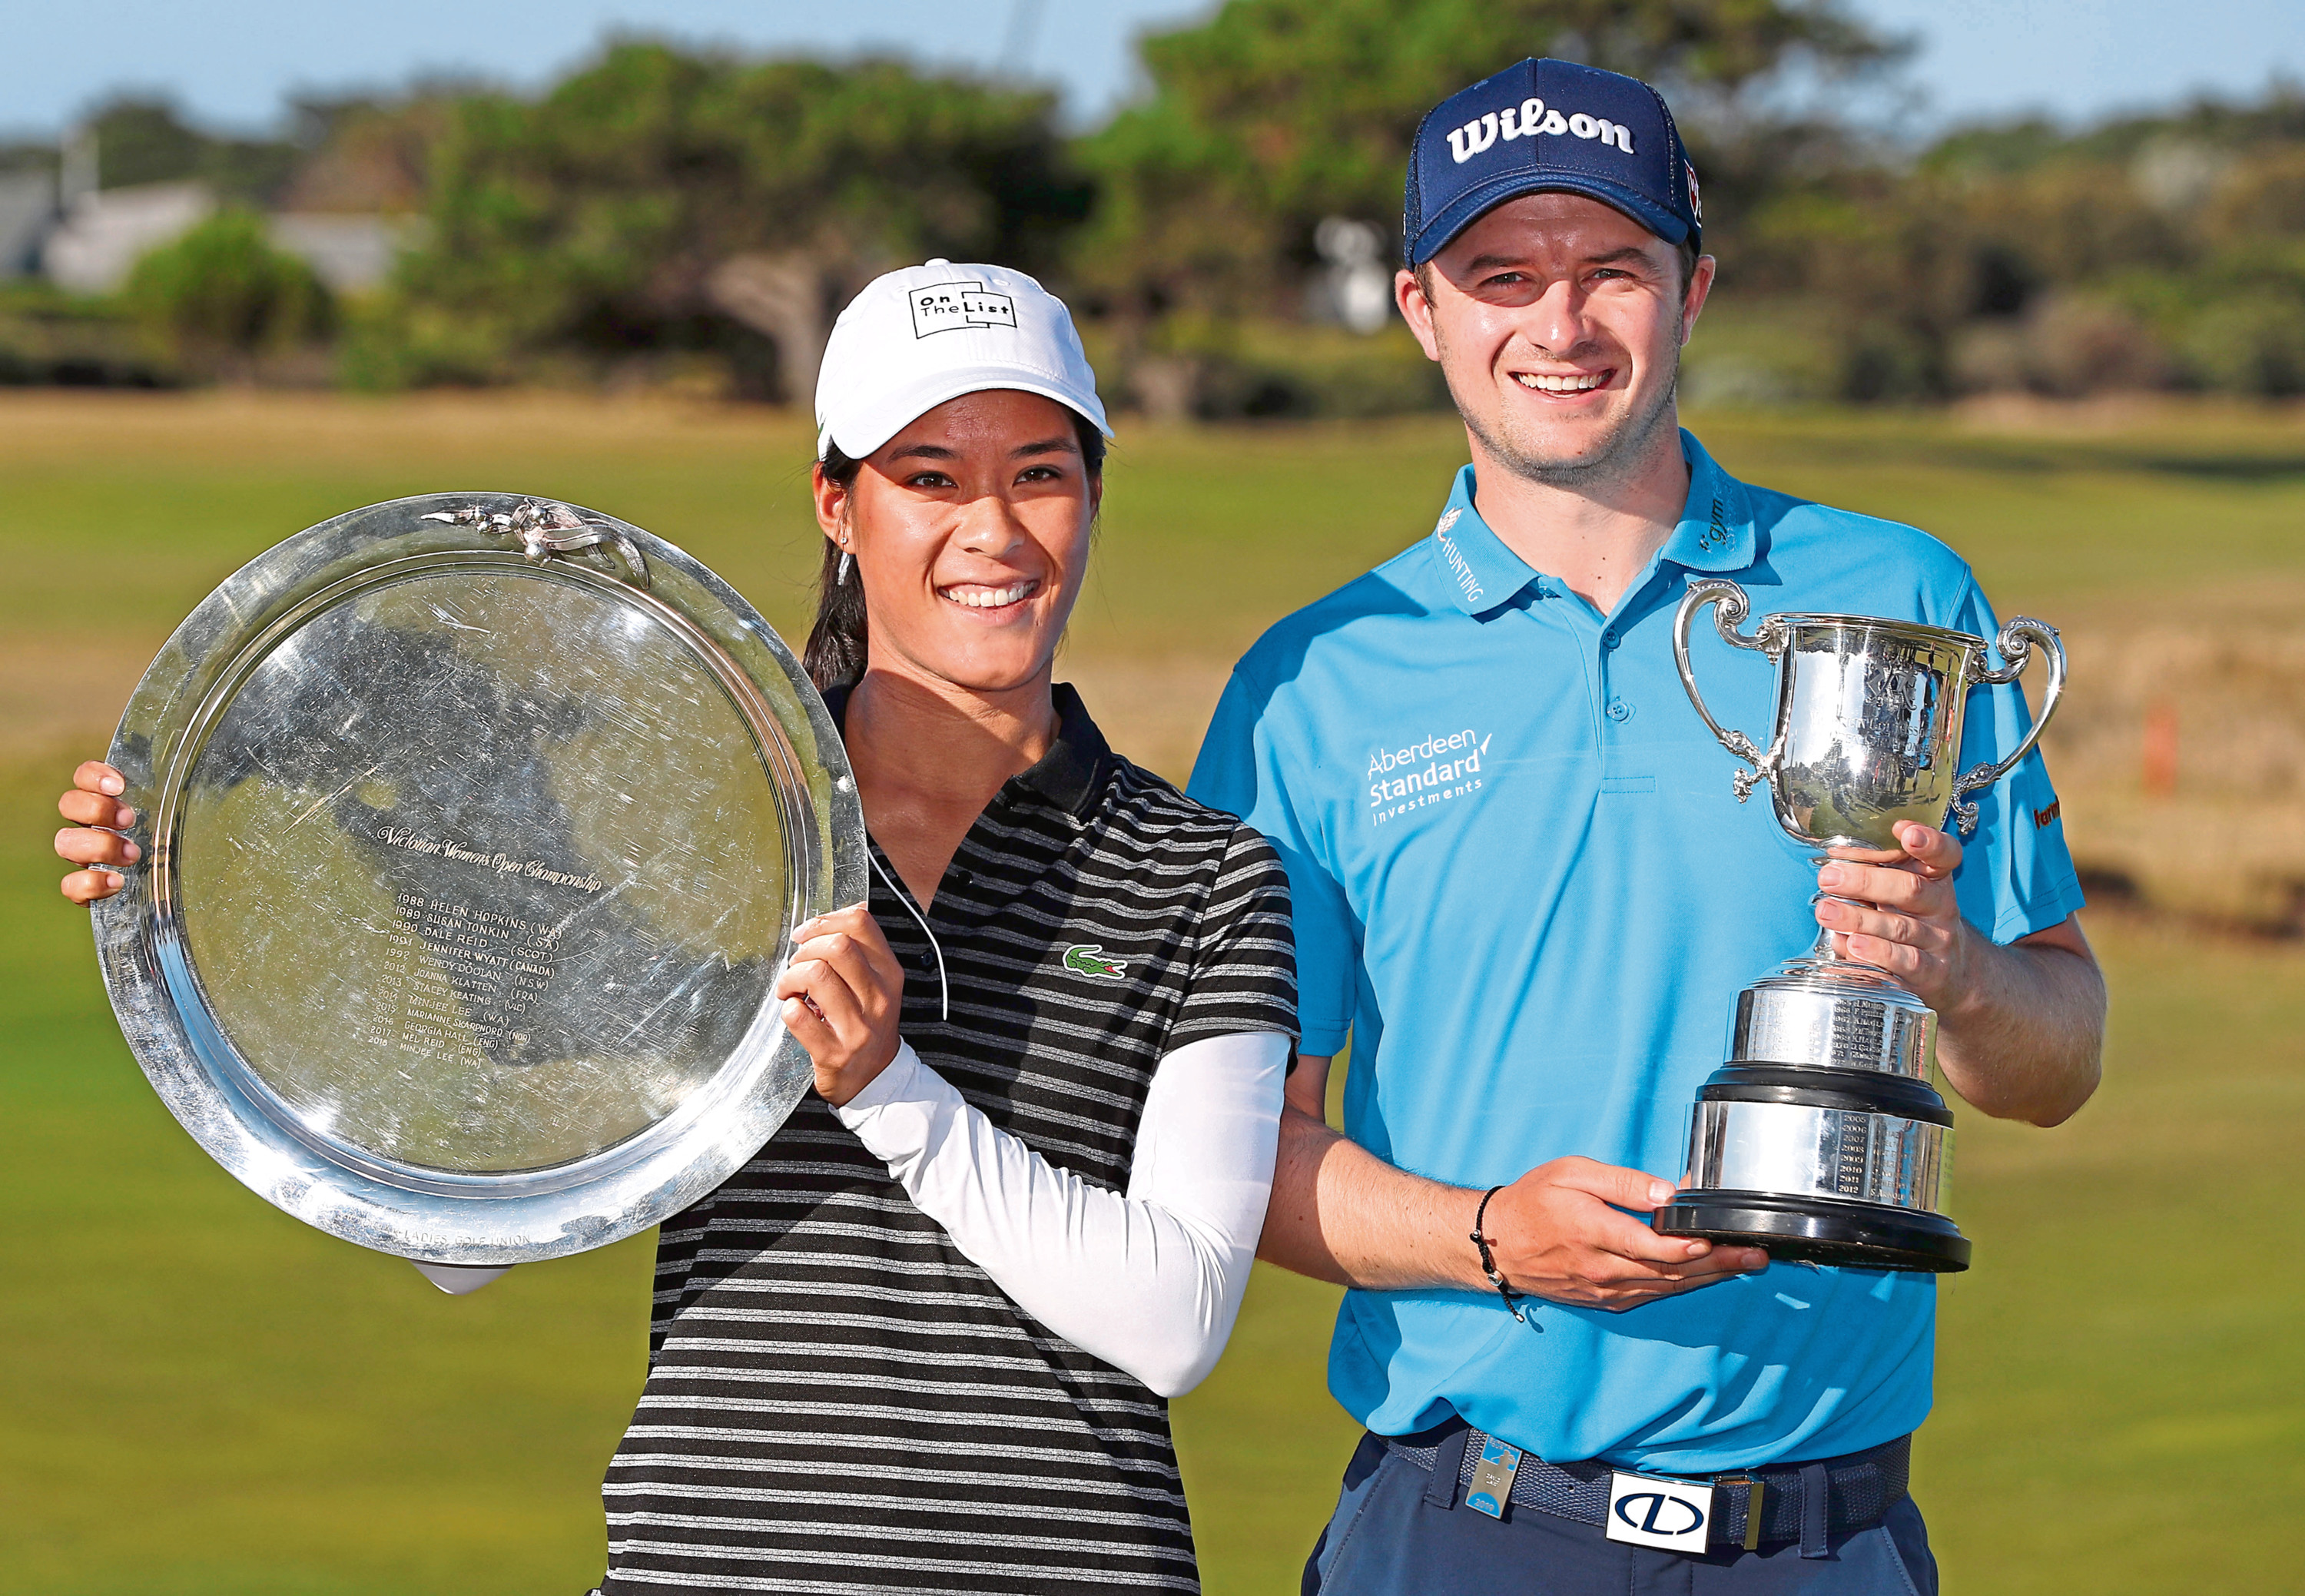 GEELONG, AUSTRALIA - FEBRUARY 10: Celine Boutier of France and David Law of Scotland pose with their winners trophies during day four of the ISPS Handa Vic Open at 13th Beach Golf Club on February 10, 2019 in Geelong, Australia. (Photo by Michael Dodge/Getty Images)